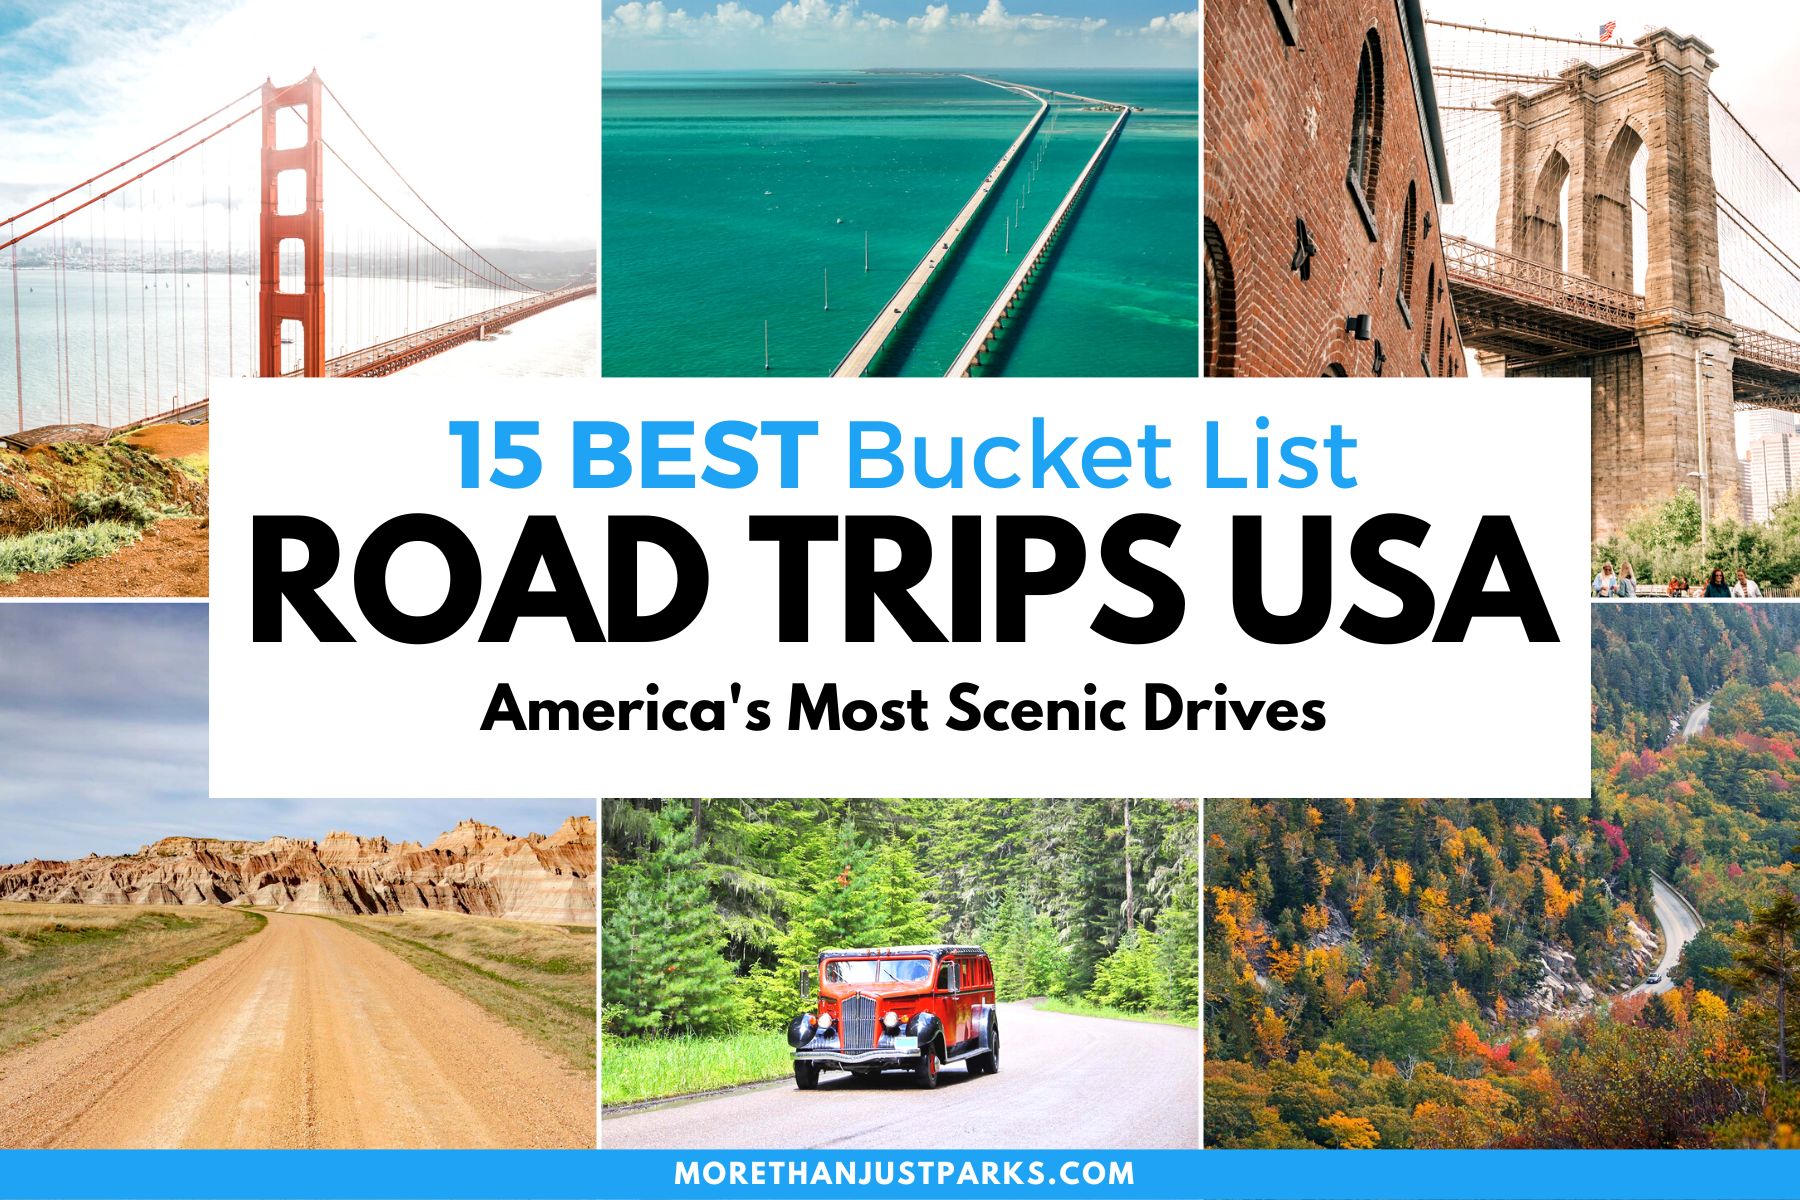 10 Reasons to add The Pan-American Highway to your Bucket List